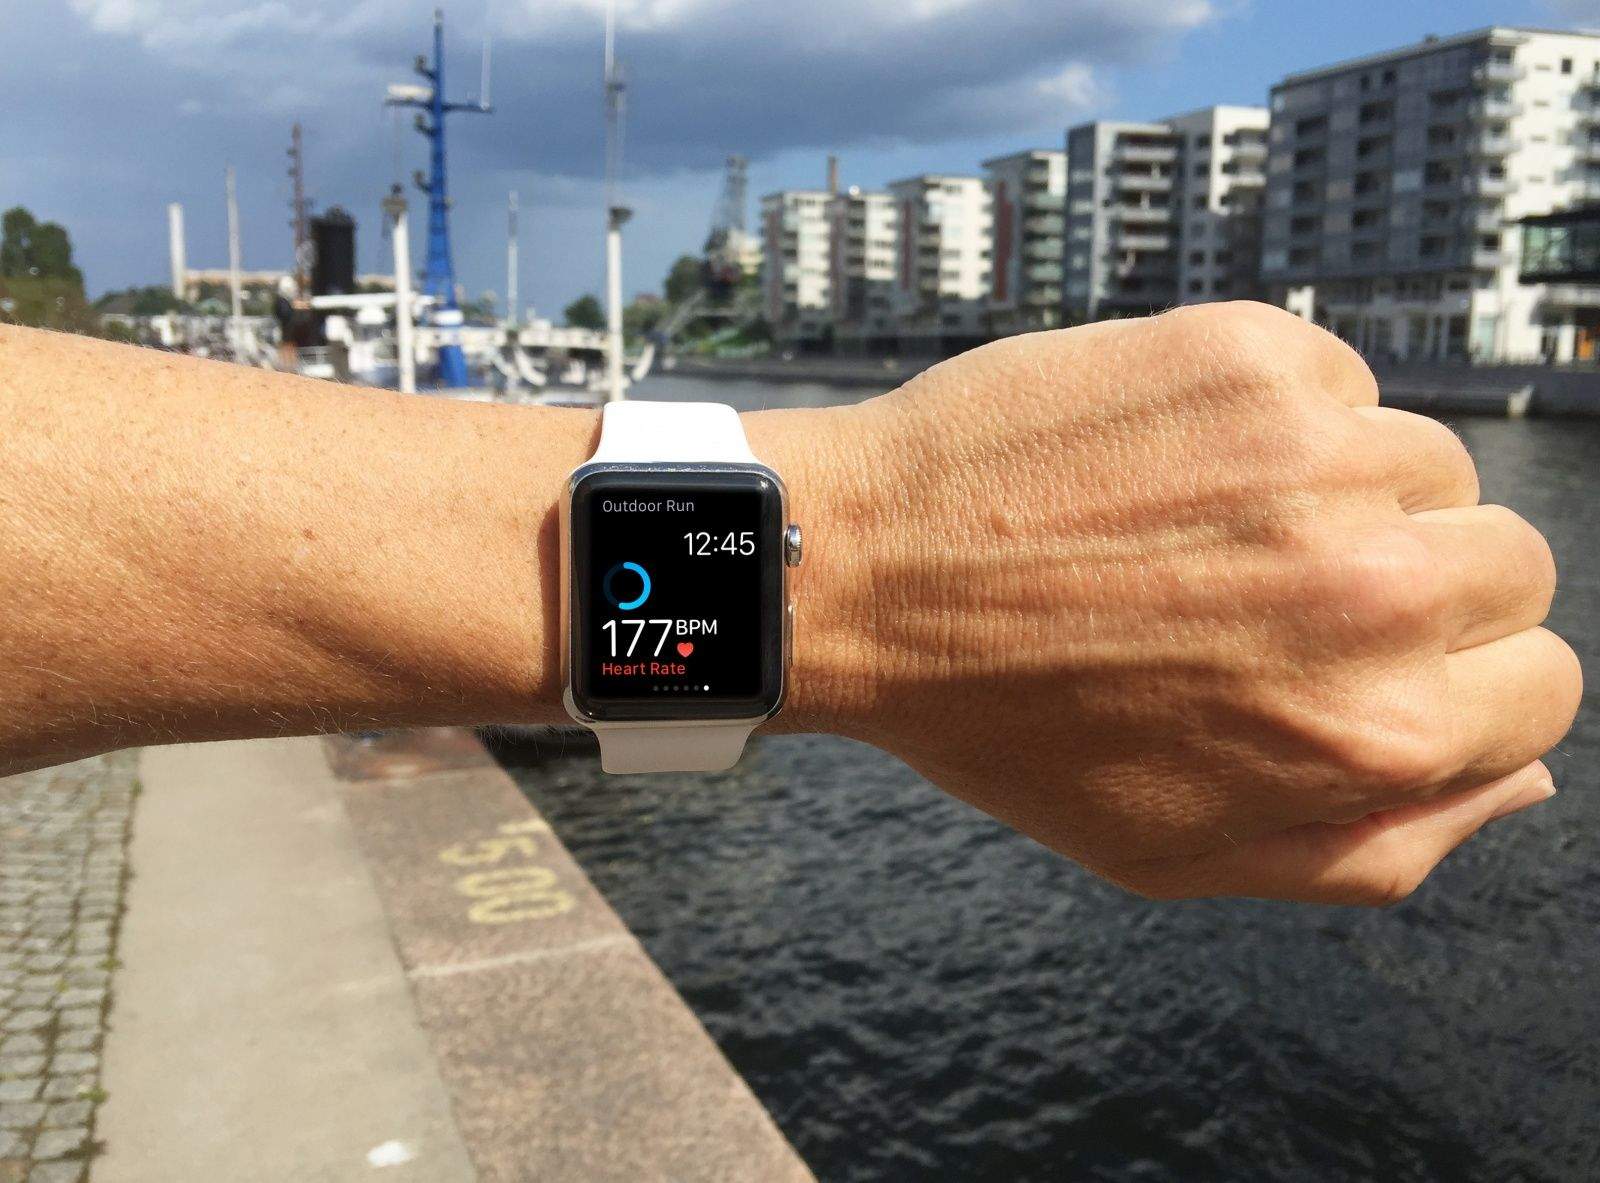 Use the heart rate sensor to find your race pace.